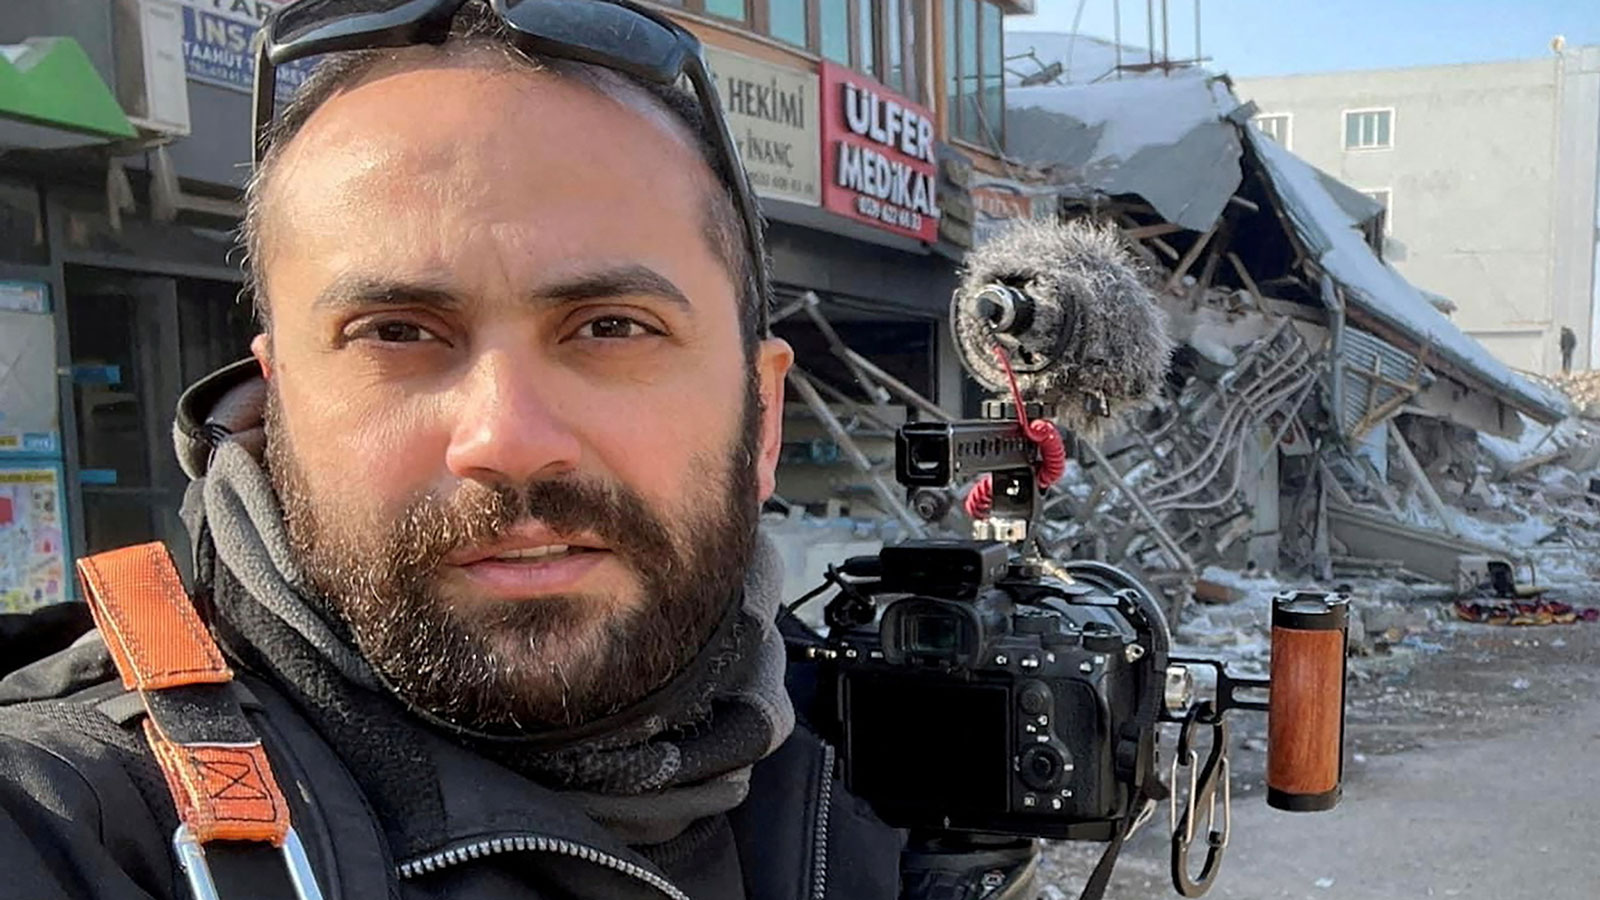 Reuters' journalist Issam Abdallah takes a selfie picture while working in Maras, Turkey, on February 11. Abdallah was killed in southern Lebanon on Friday, according to a statement from the news agency.